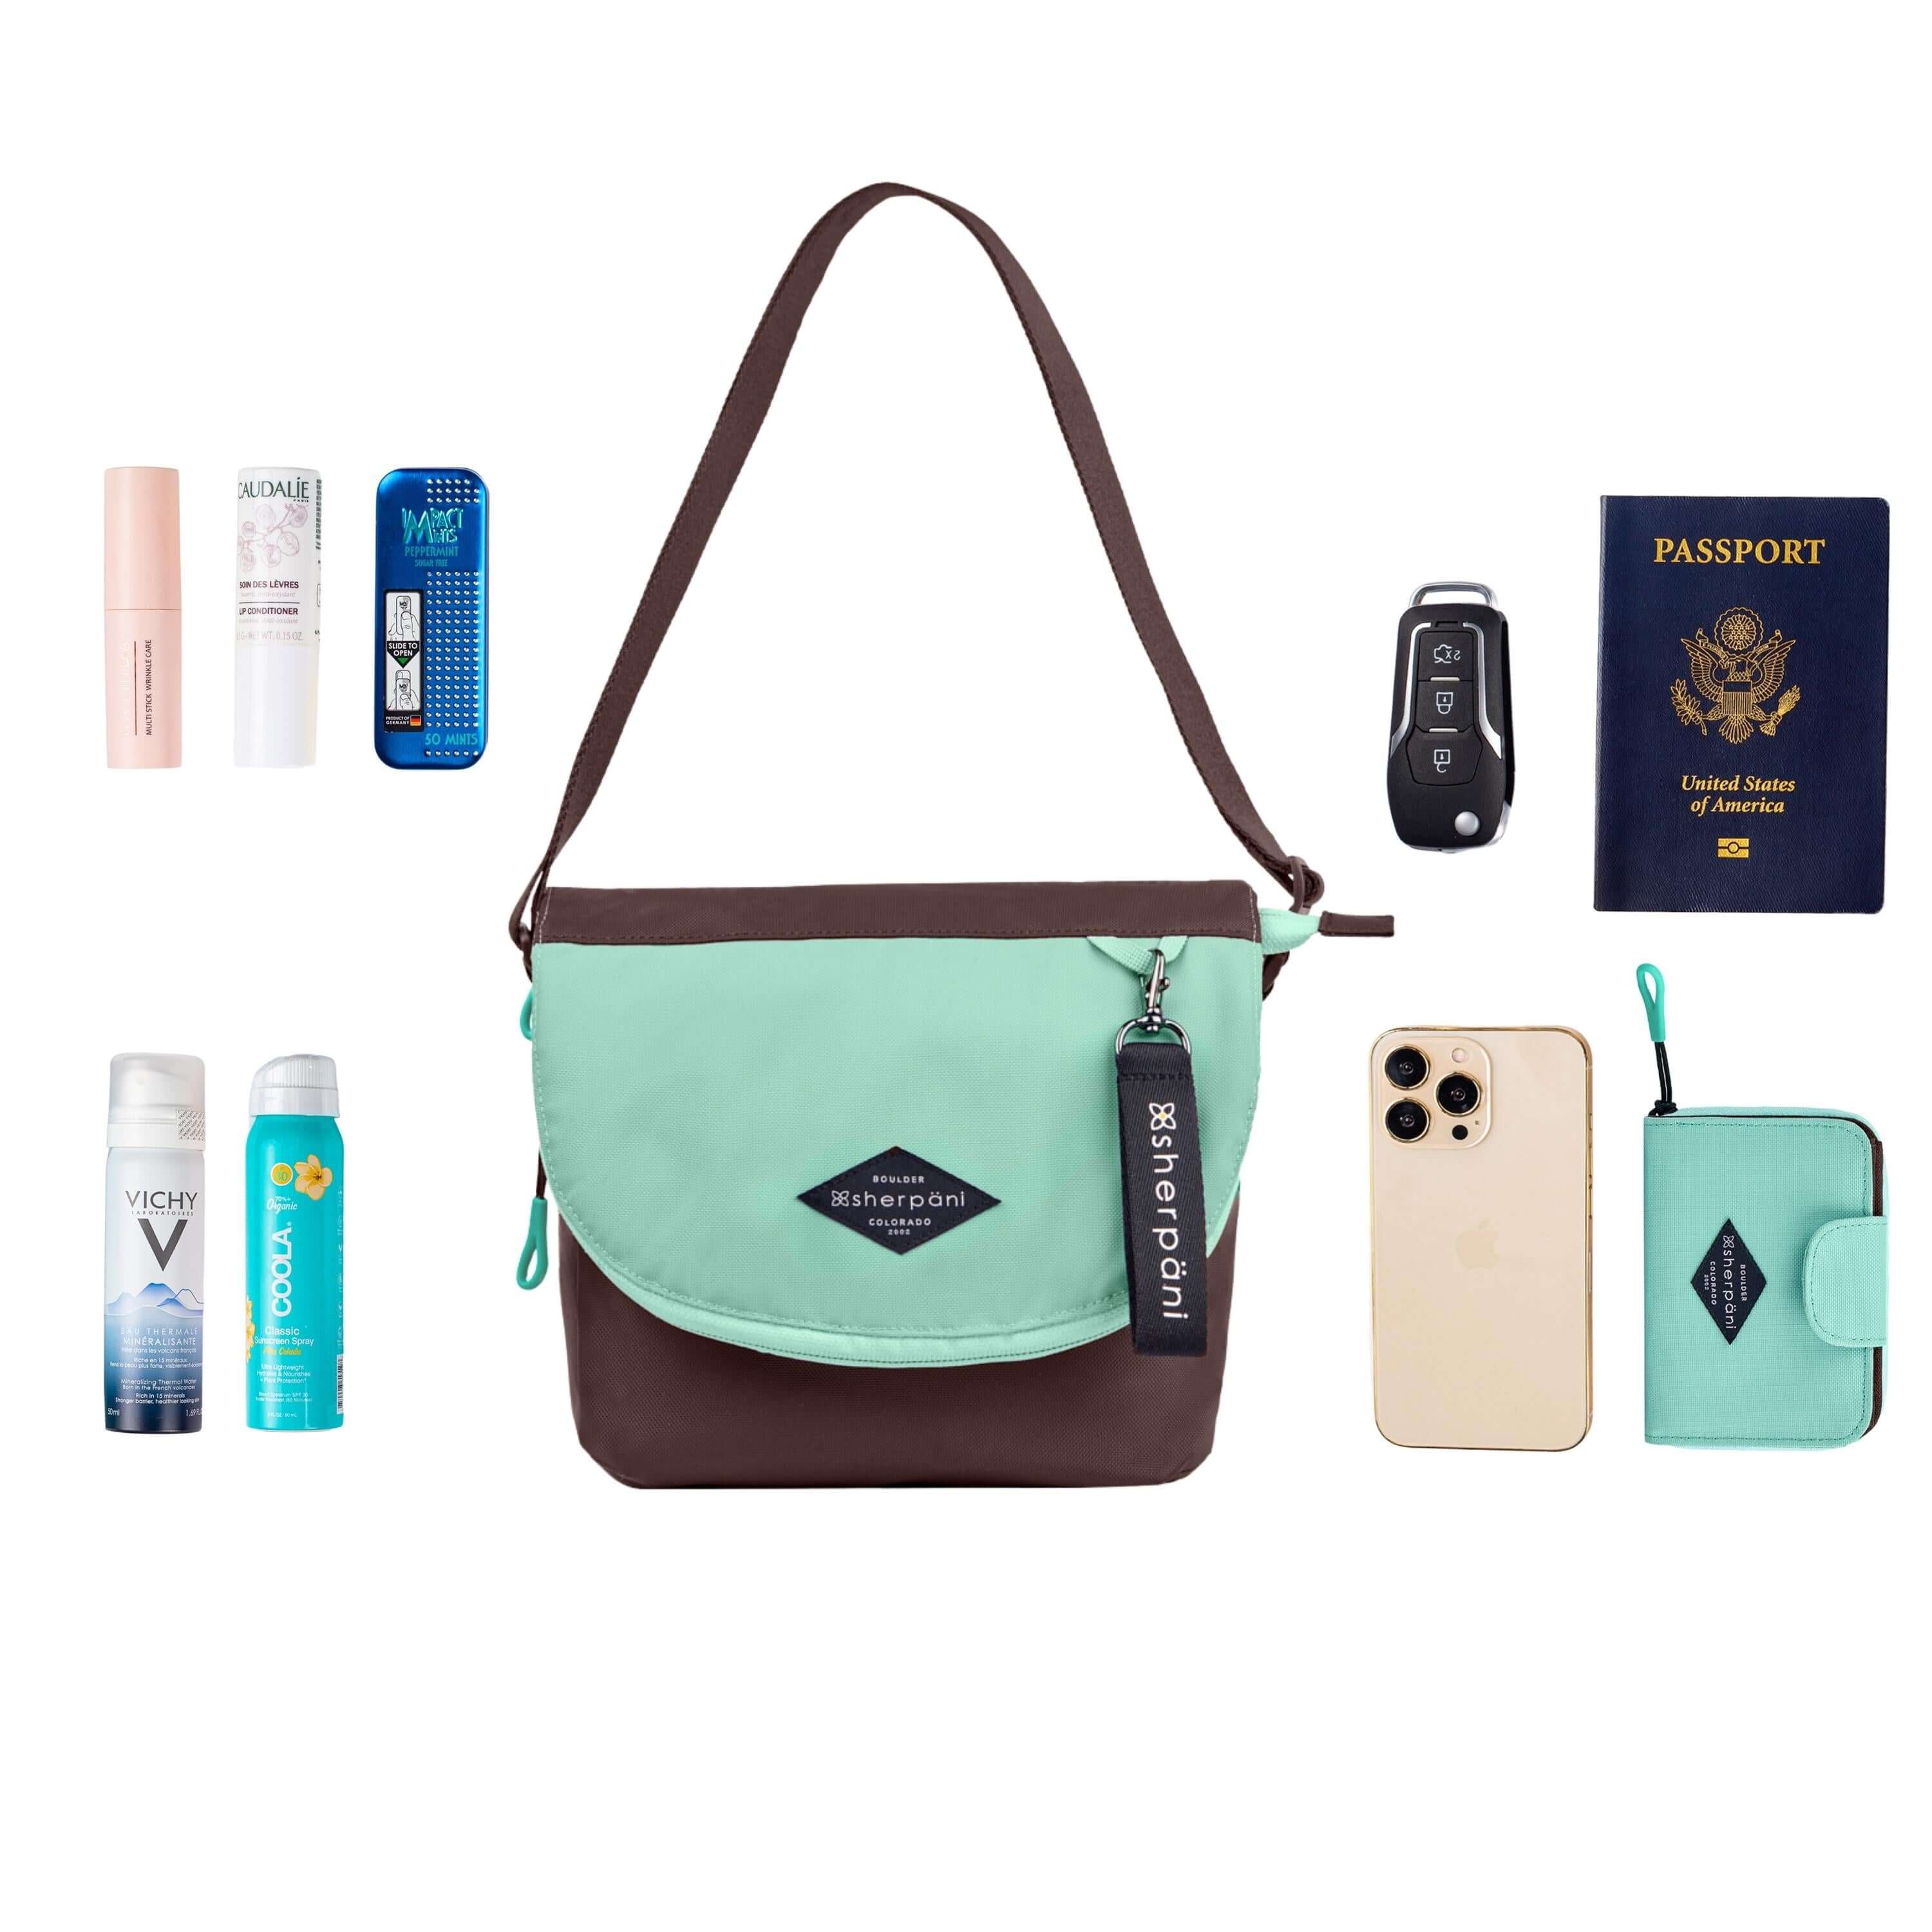 Top view of example items to fill the bag. Sherpani crossbody, the Milli in Seagreen, lies in the center. It is surrounded by an assortment of items: skincare products, sunscreen, beauty spray, car key, passport, phone and Sherpani travel accessory the Barcelona in Seagreen.